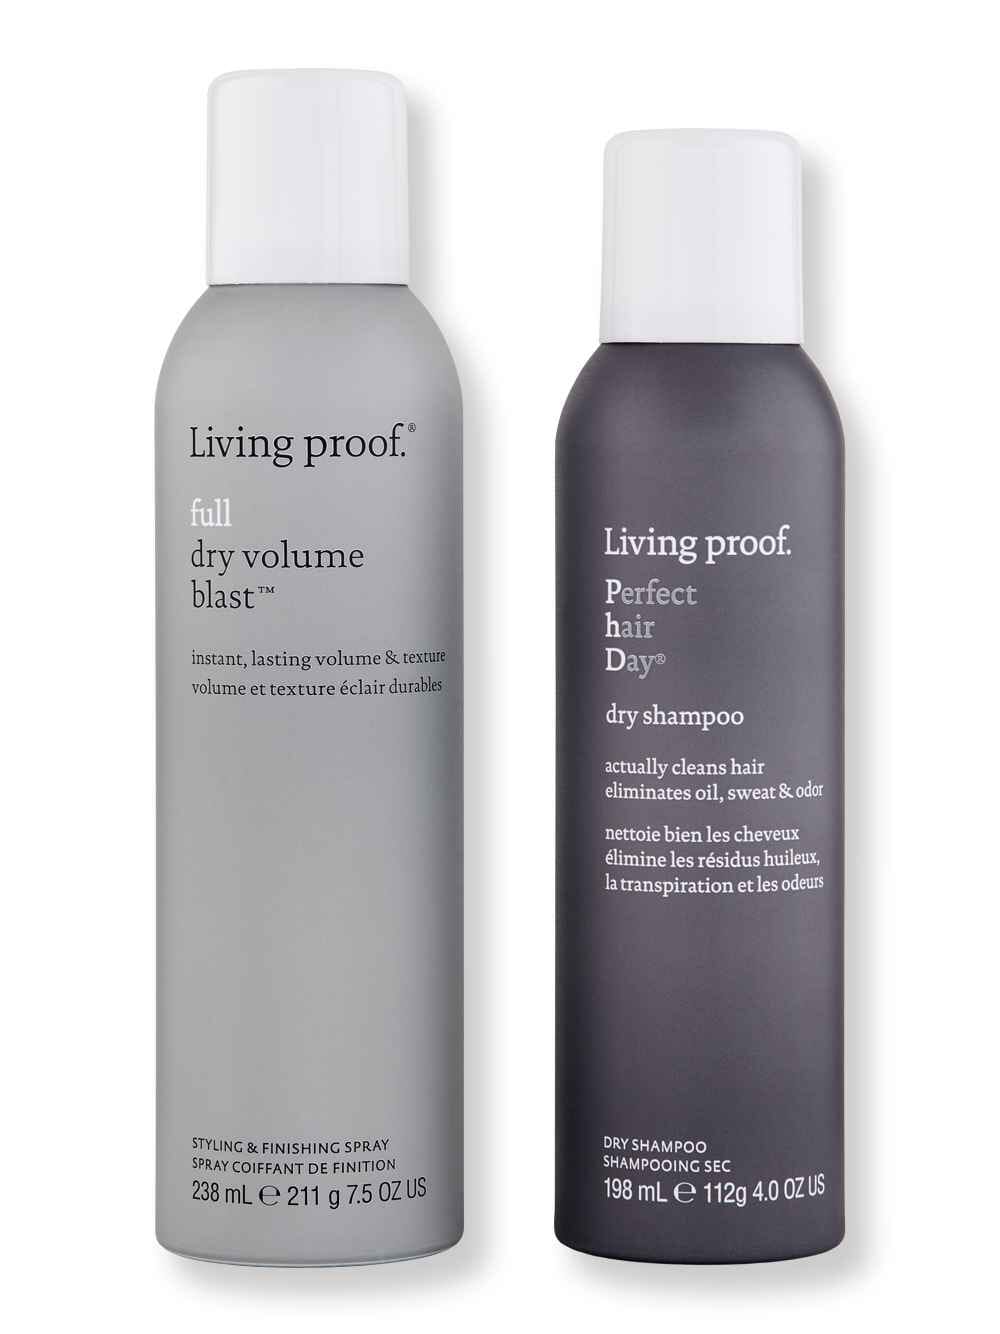 Living Proof Living Proof Perfect Hair Day Dry Shampoo 4 oz & Full Dry Volume Blast 7.5 oz Hair Care Value Sets 